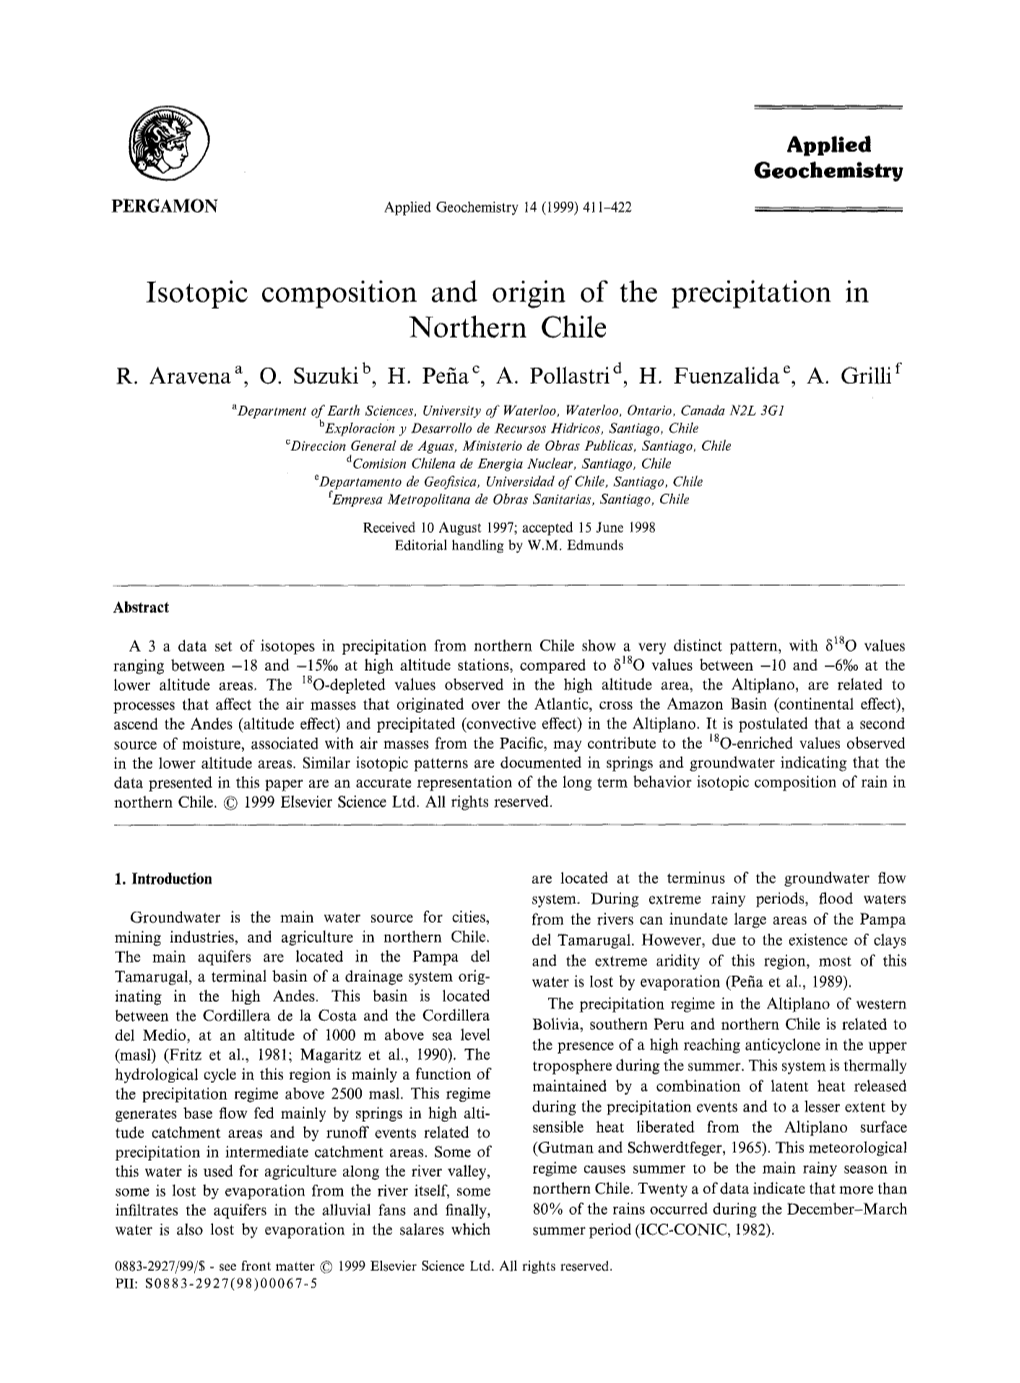 Isotopic Composition and Origin of the Precipitation in Northern Chile